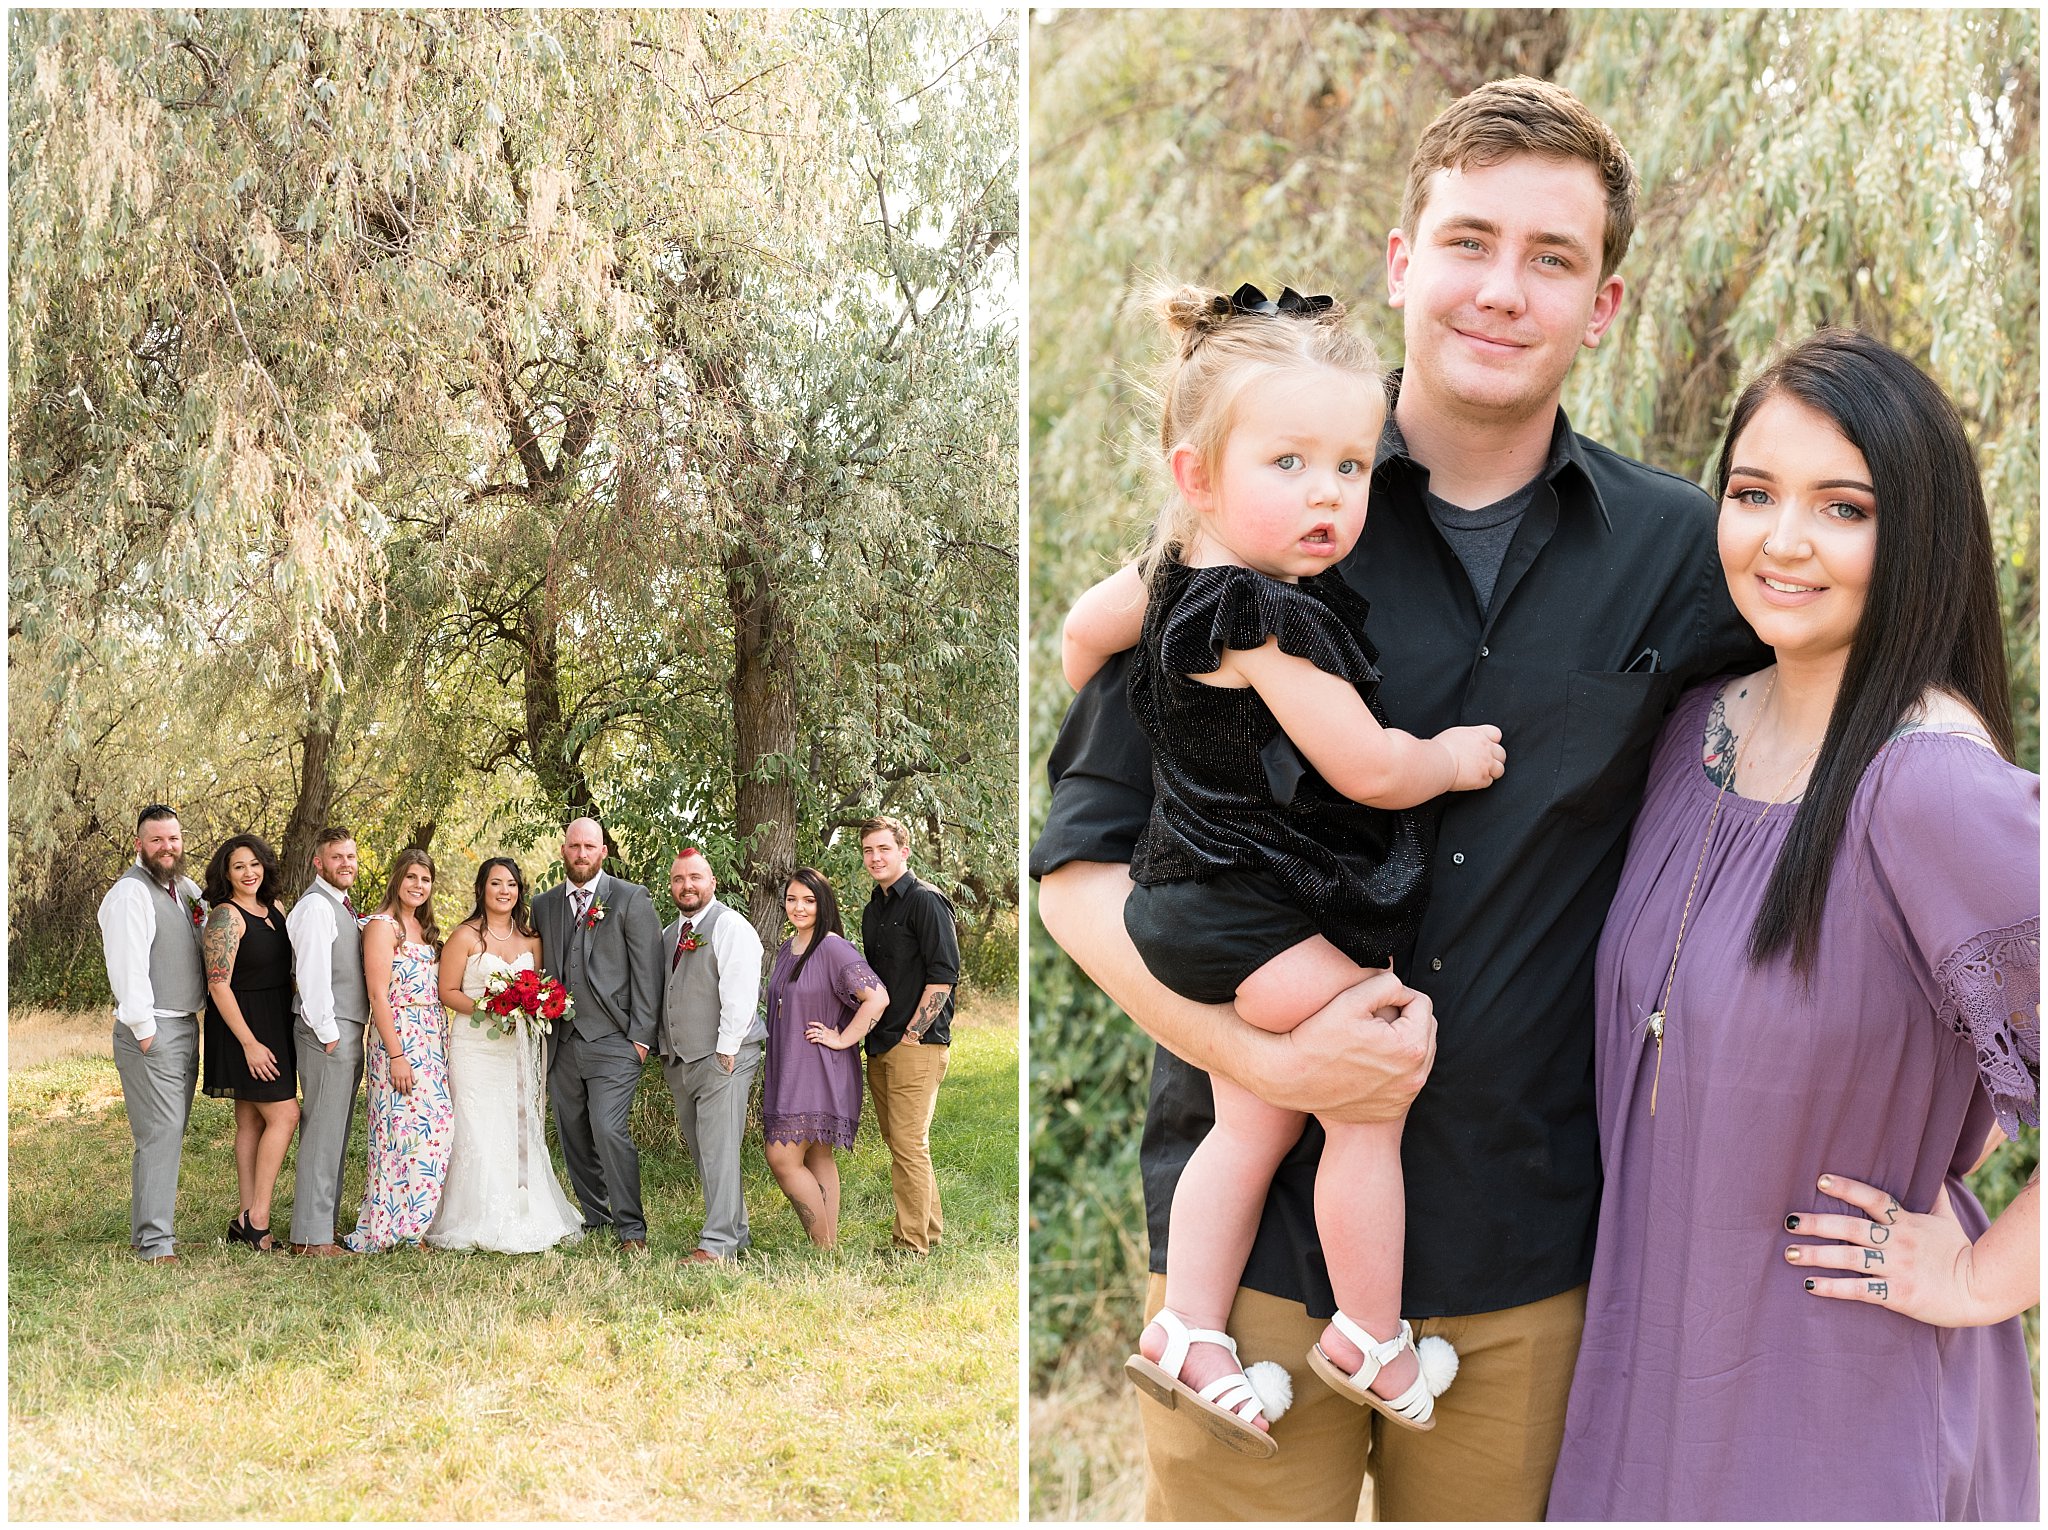 Family portrait with bride, groom and siblings | Red and Grey wedding | Davis County Outdoor Wedding | Jessie and Dallin Photography